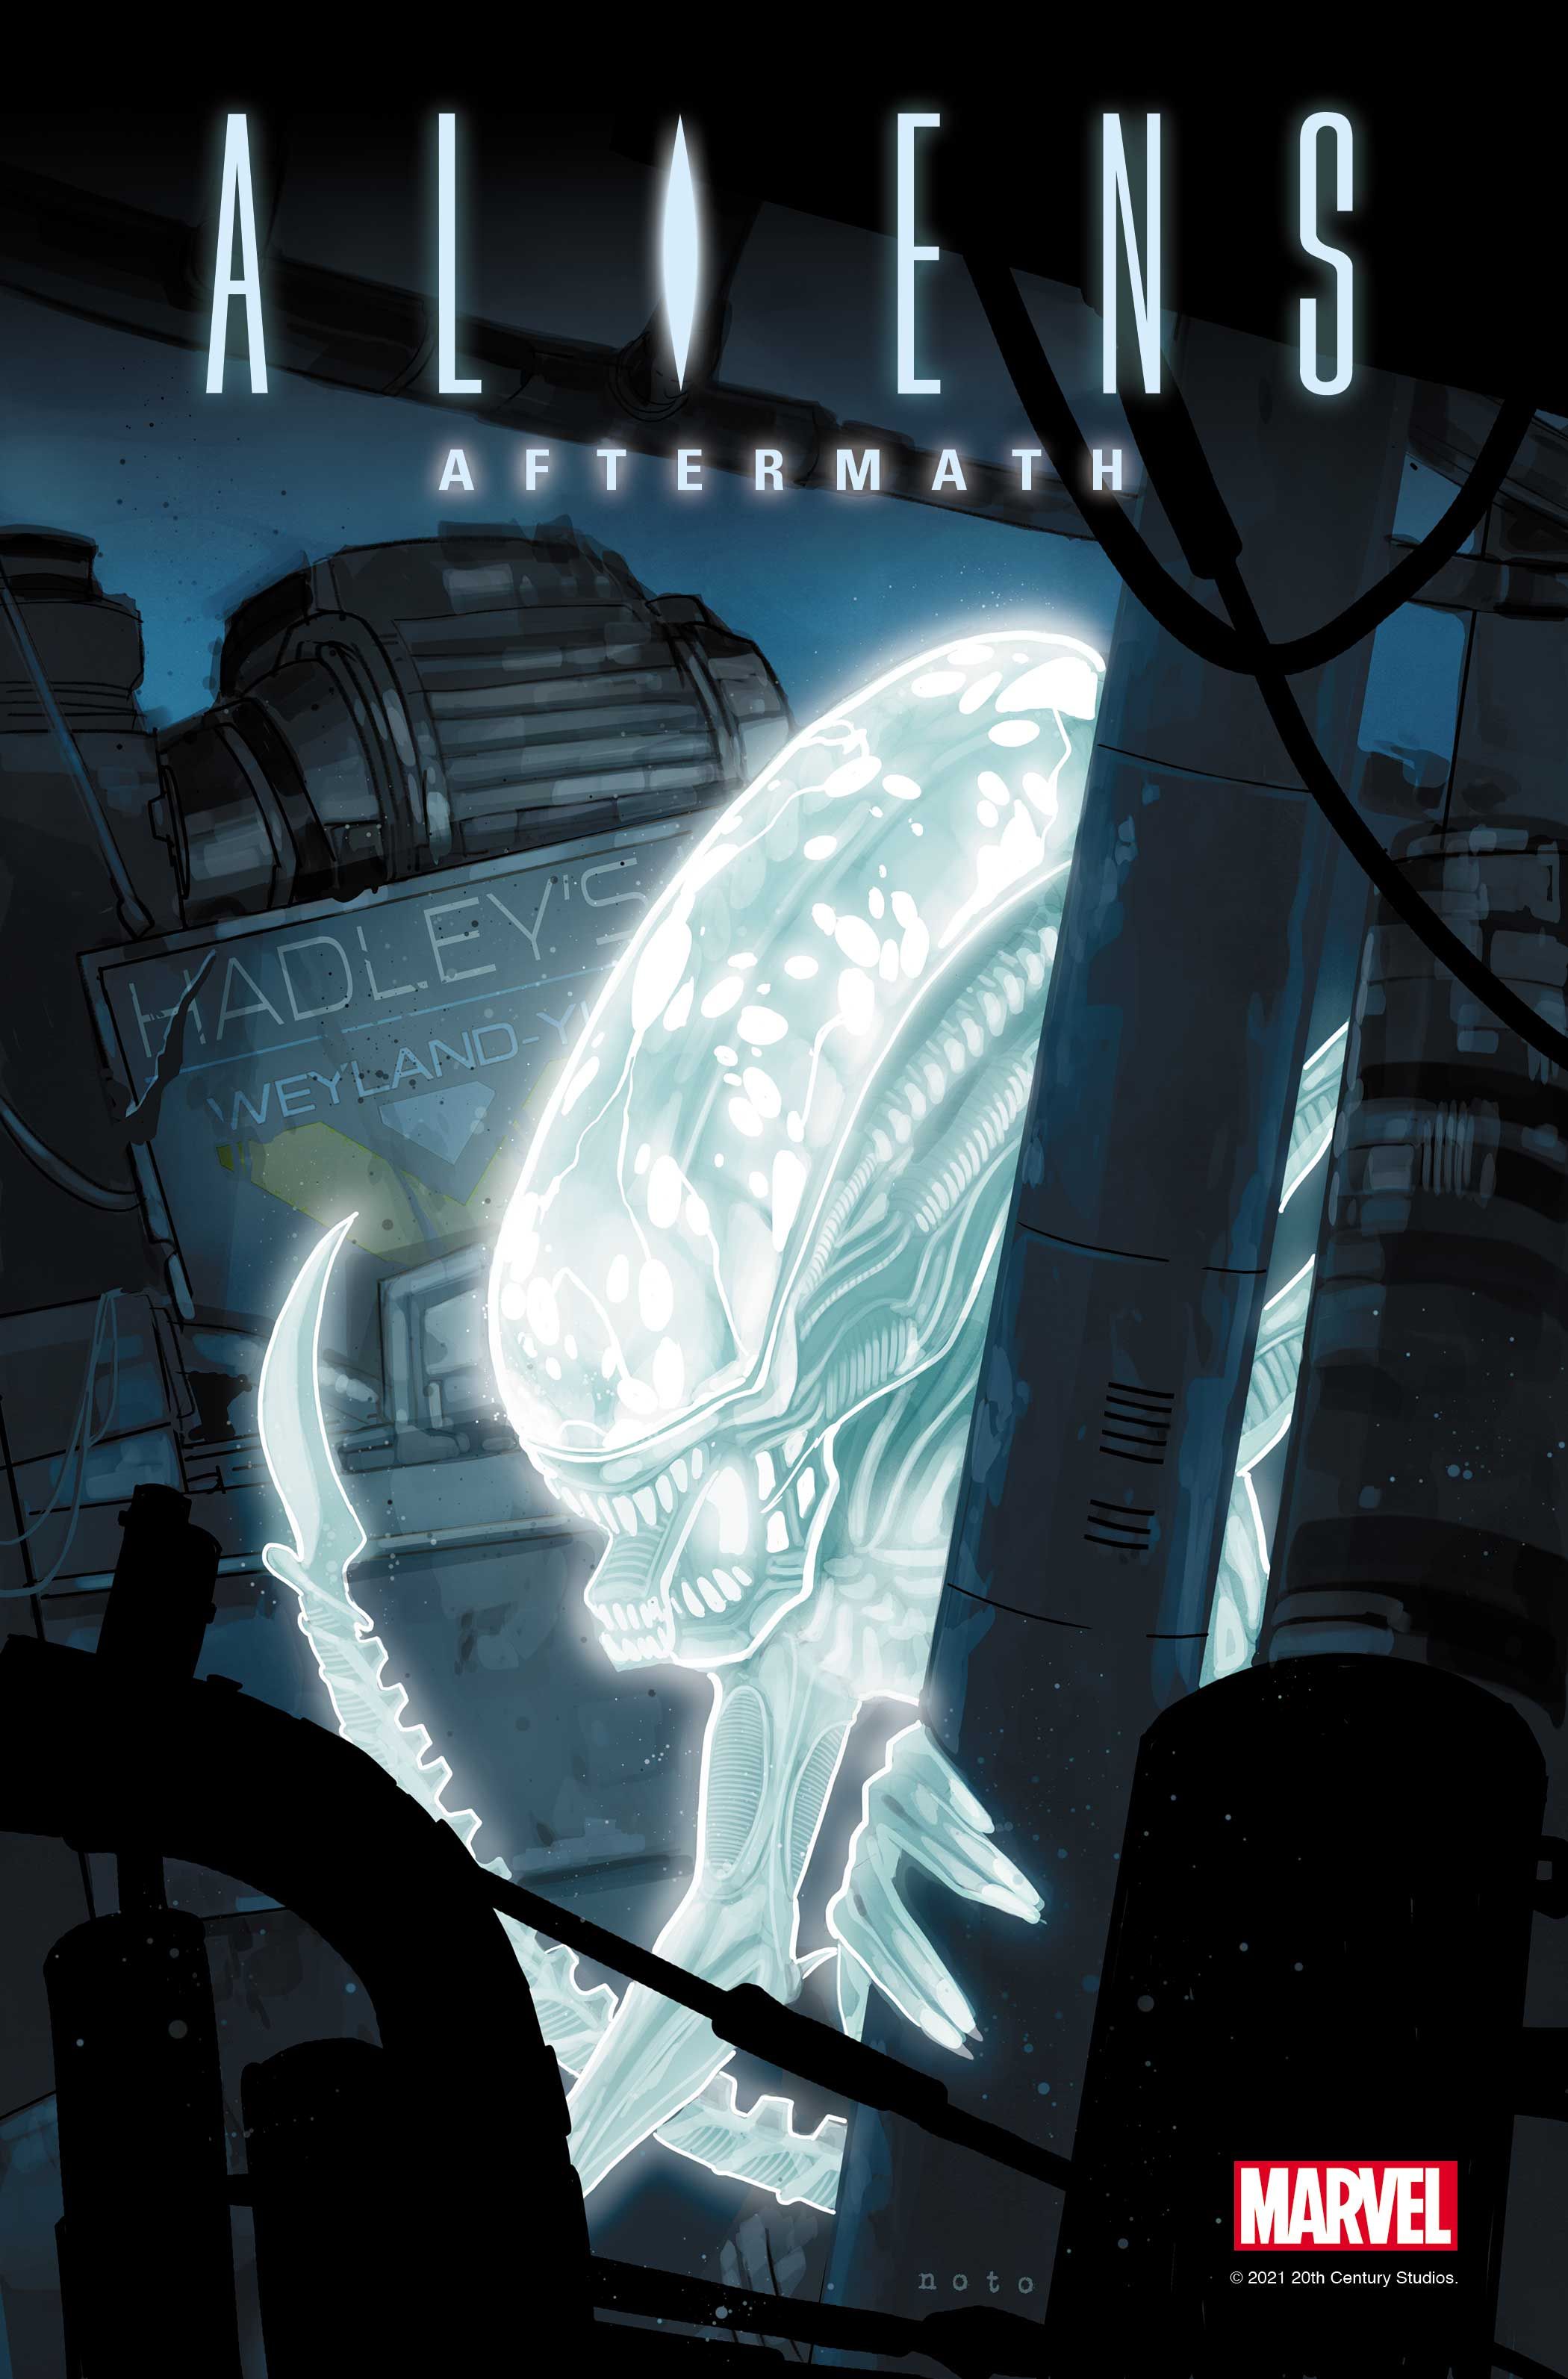 Marvel Aliens: Aftermath cover art